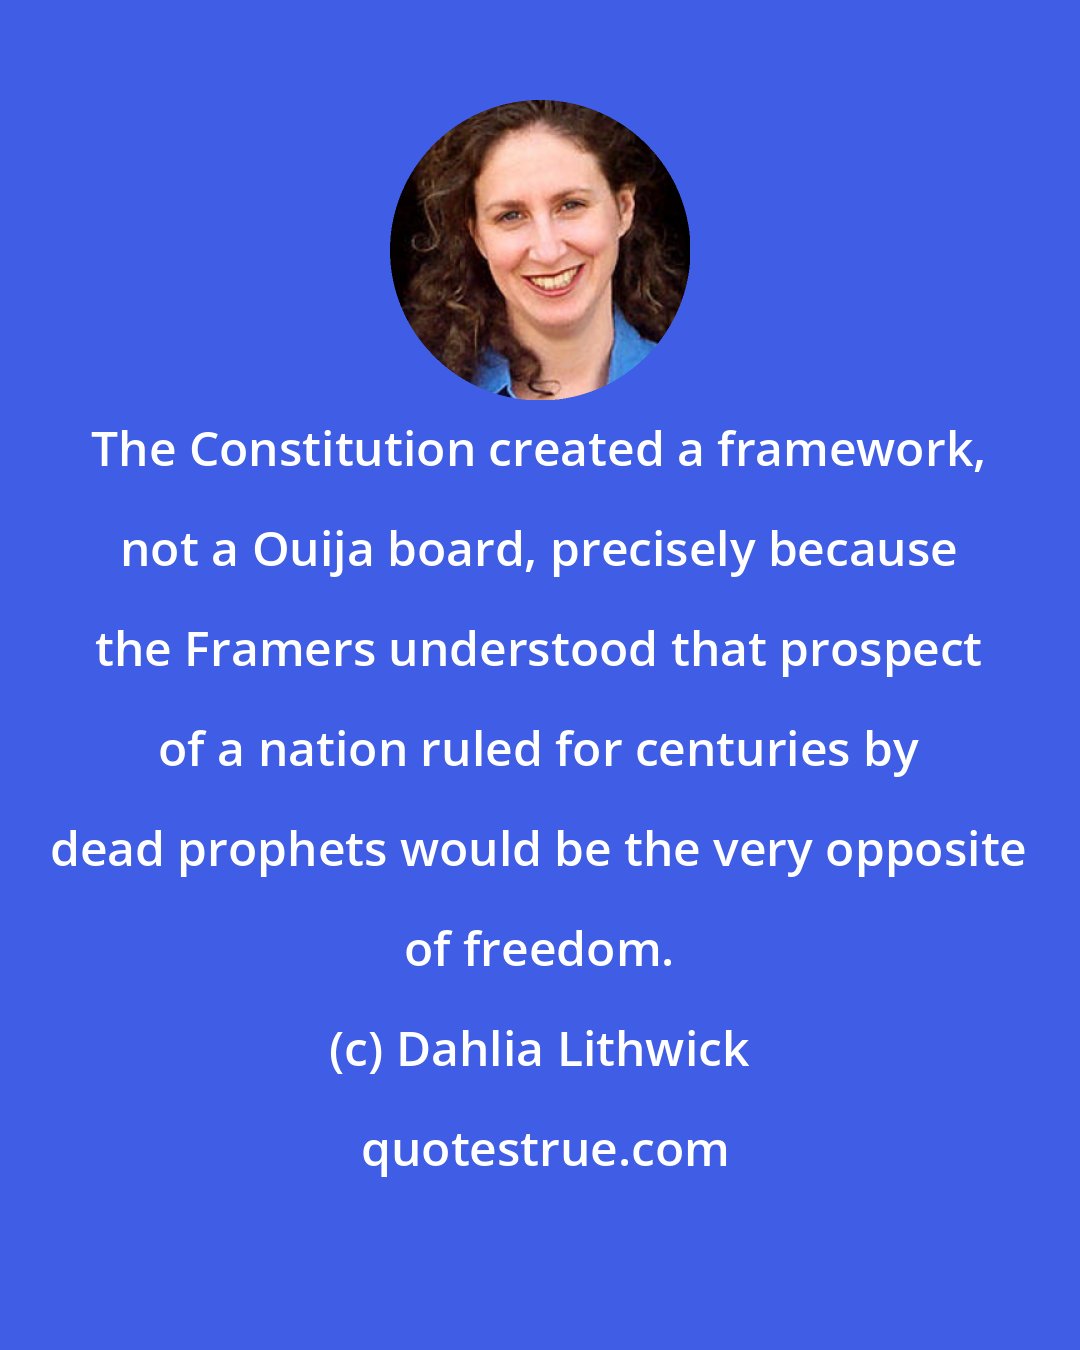 Dahlia Lithwick: The Constitution created a framework, not a Ouija board, precisely because the Framers understood that prospect of a nation ruled for centuries by dead prophets would be the very opposite of freedom.